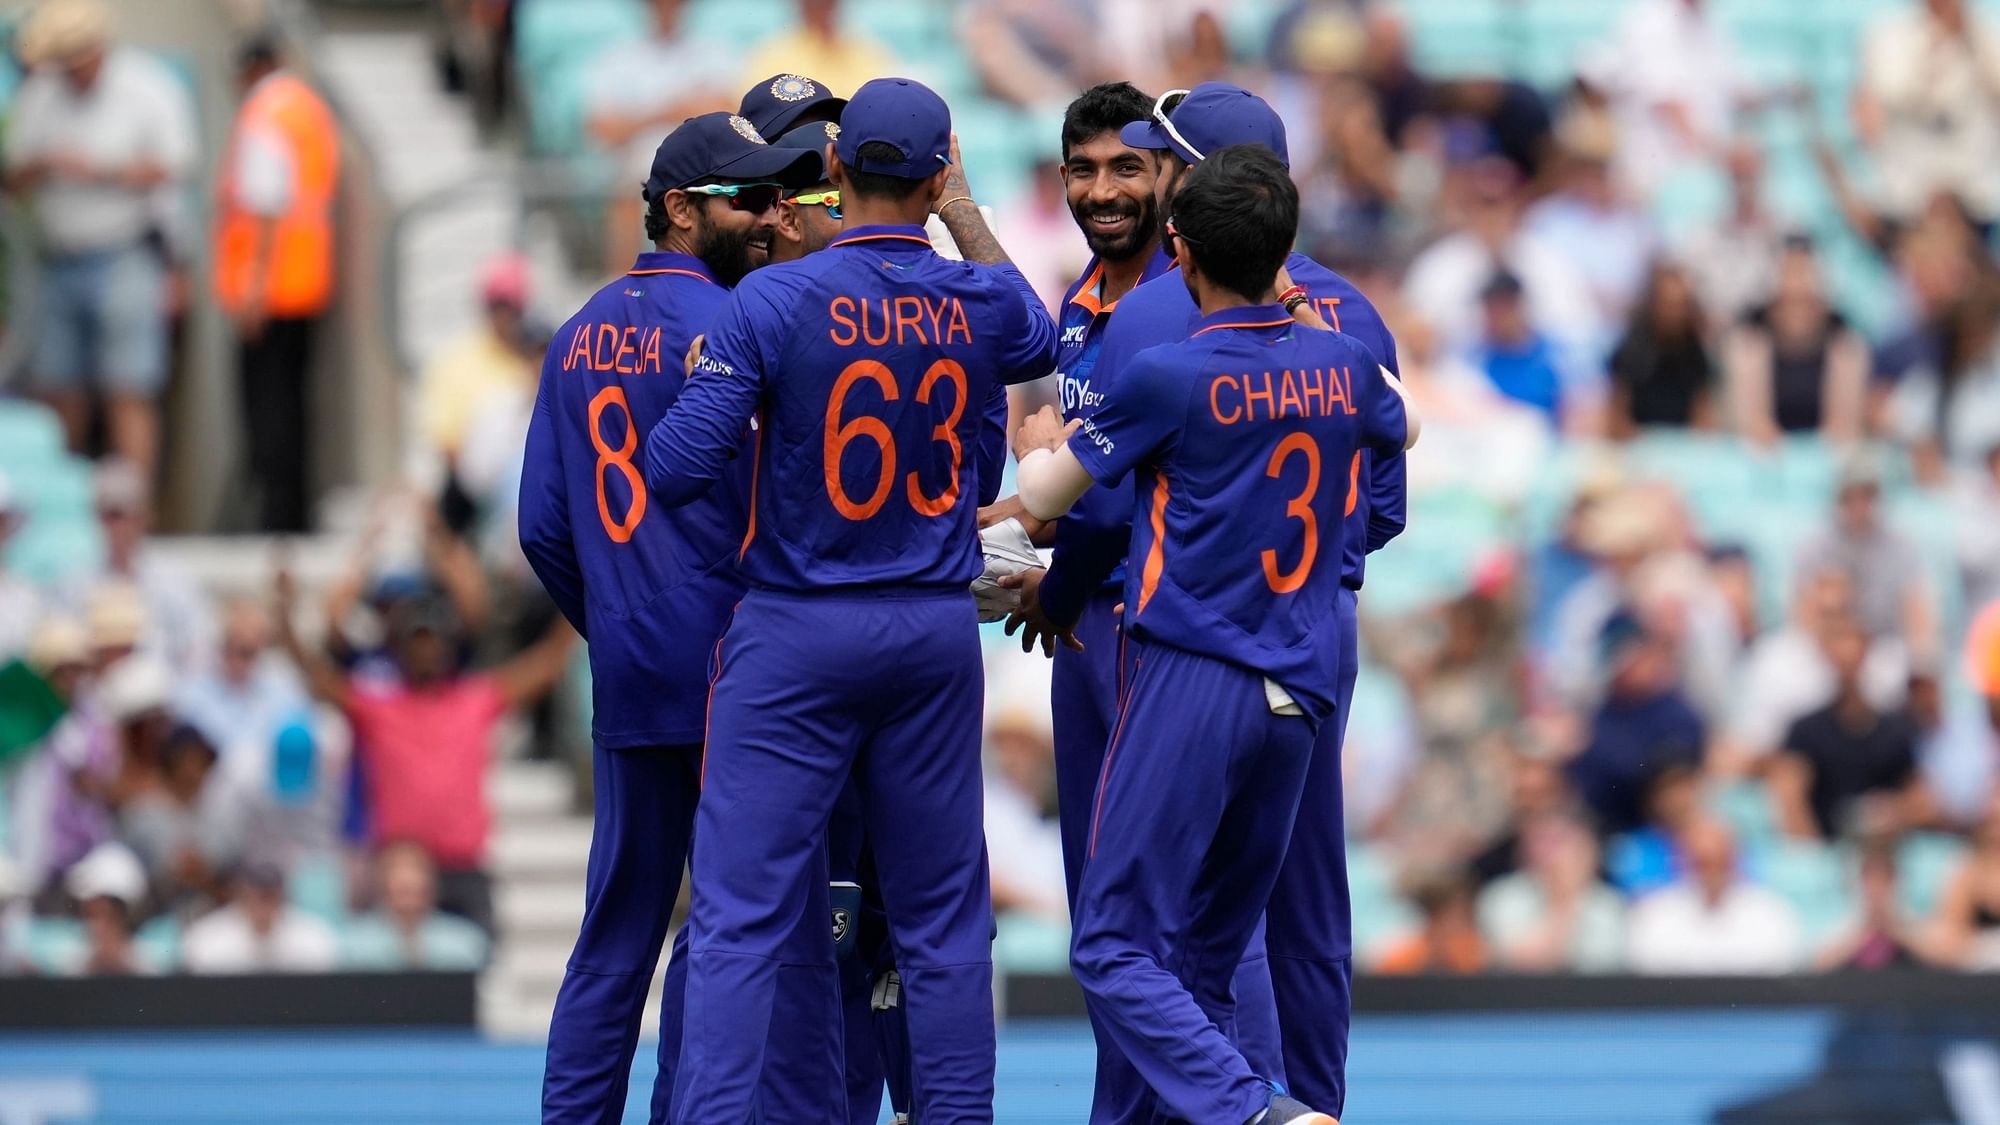 <div class="paragraphs"><p>Team India surpassed Pakistan in the latest ODI rankings following their win in the series opener against England at the Oval.&nbsp;</p></div>